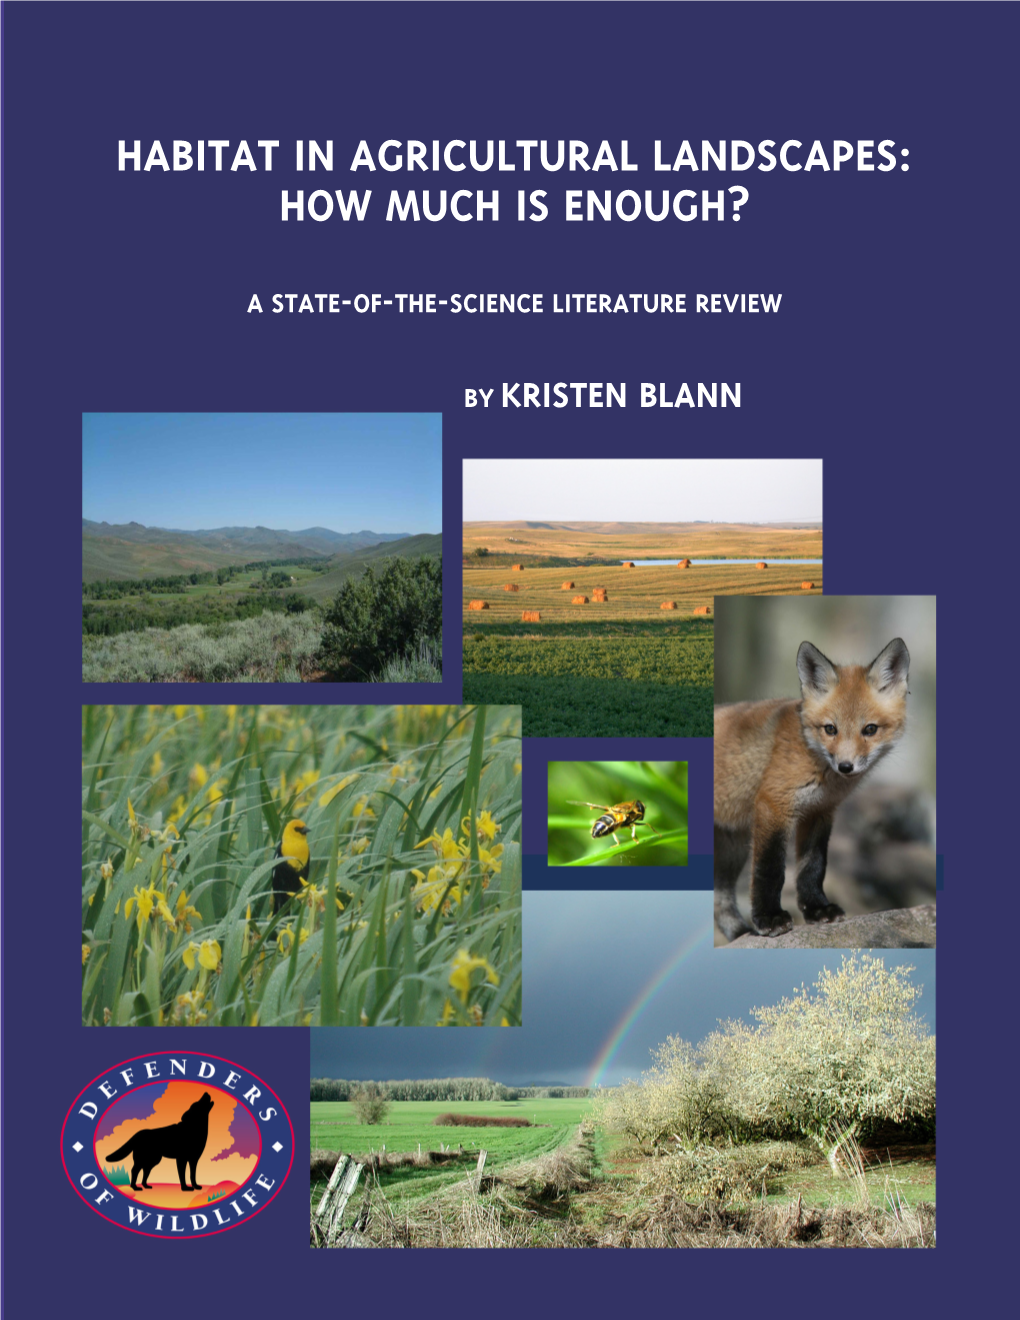 Habitat in Agricultural Landscapes: How Much Is Enough?